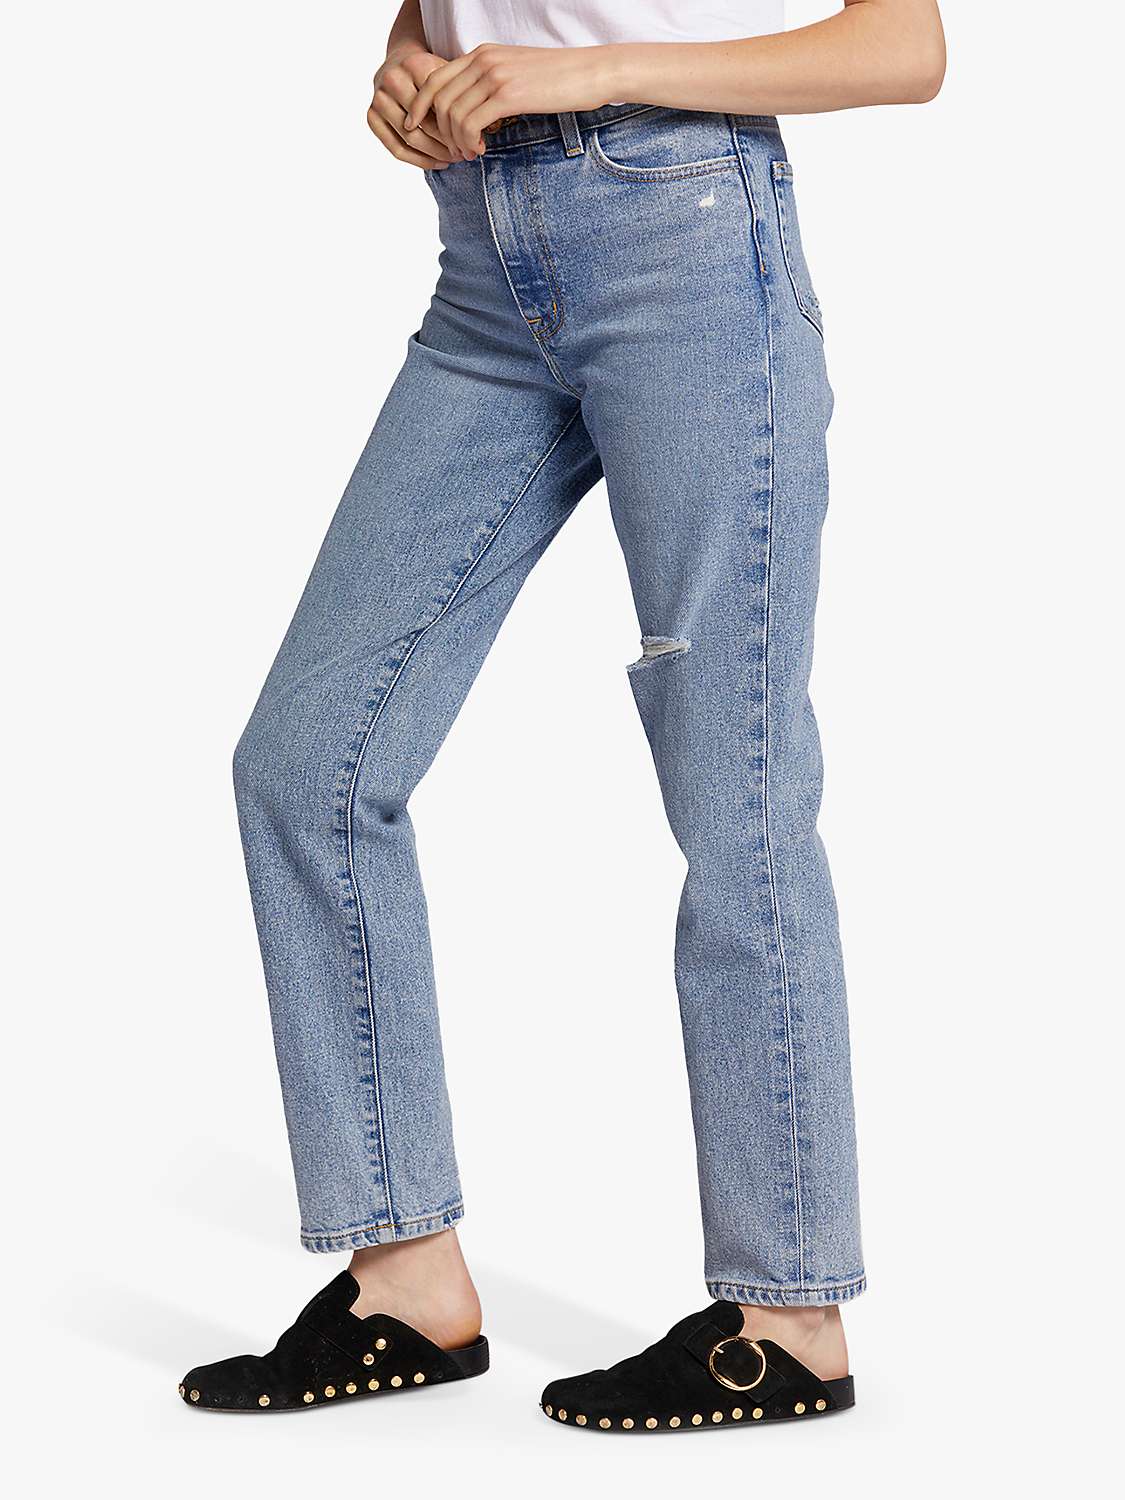 Buy Current/Elliott The Soulmate High Rise Slim Straight Distressed Jeans, Camino Light Blue Online at johnlewis.com